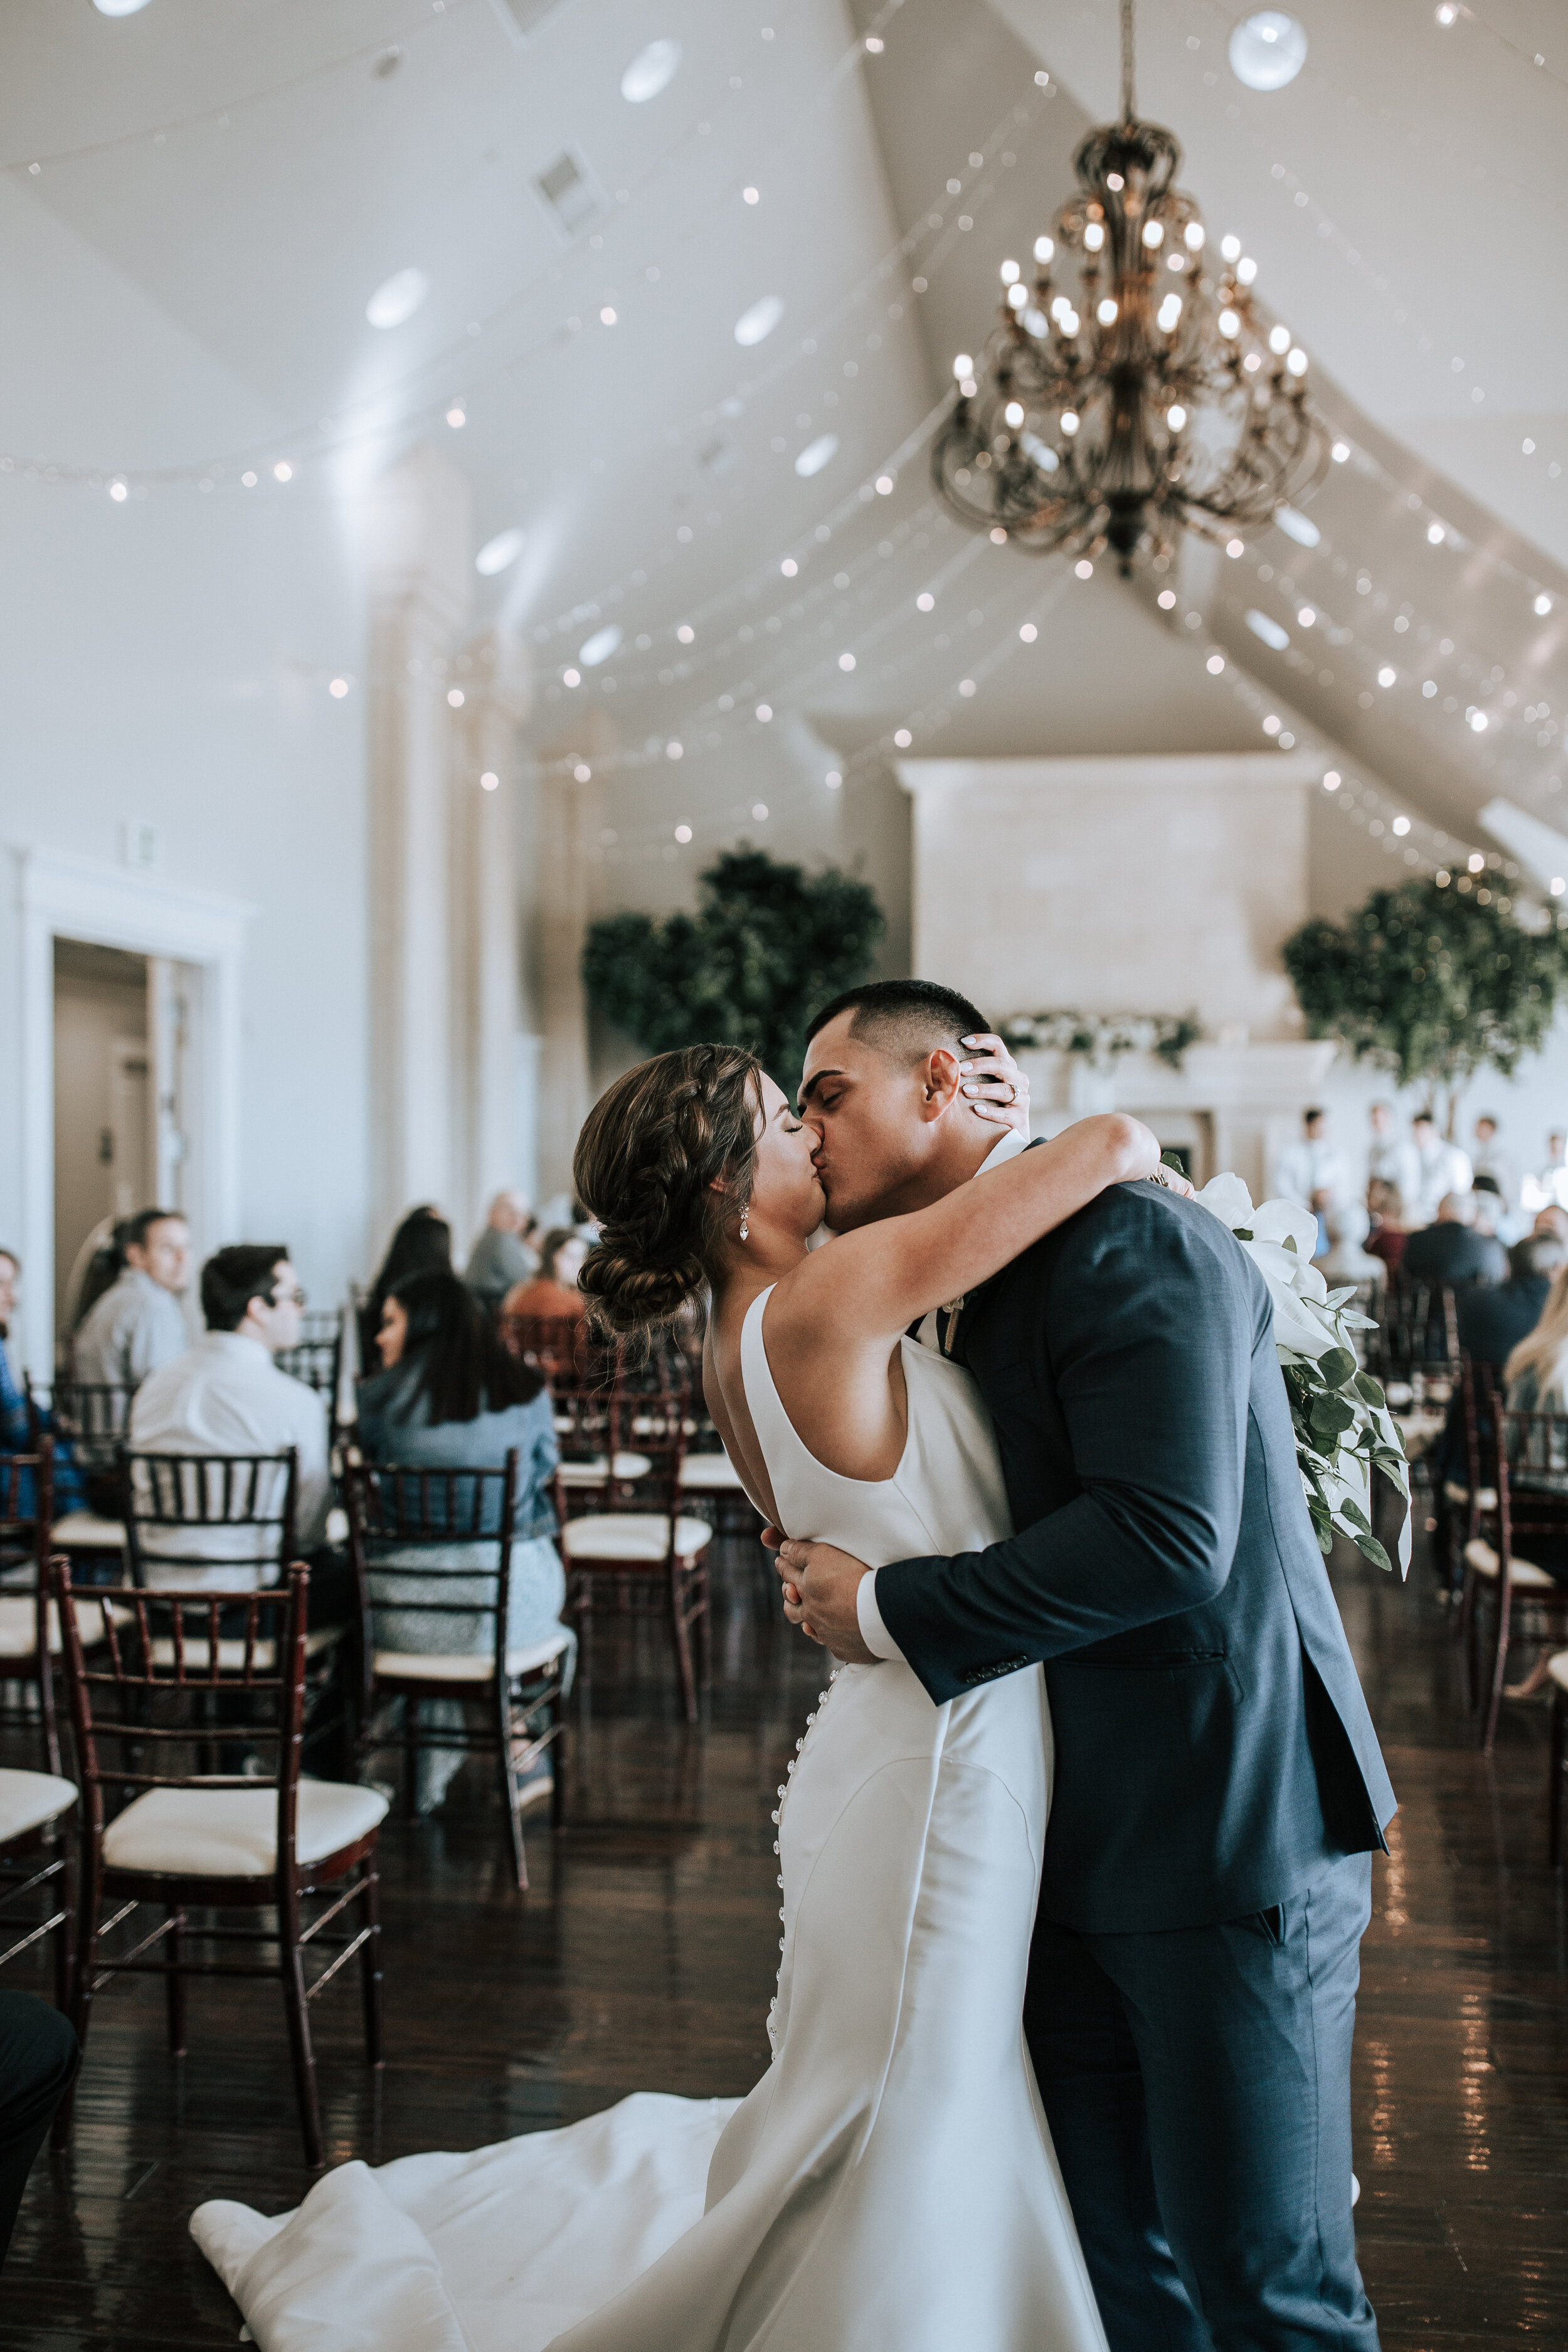  At Sleepy Ridge Golf Course a bride kisses her groom passionately under a lighted ceiling with a chandelier. buttons down the back wedding dress lights on the ceiling black suit black chairs for ceremony #emilyjenkinsphotography #emilyjenkinswedding